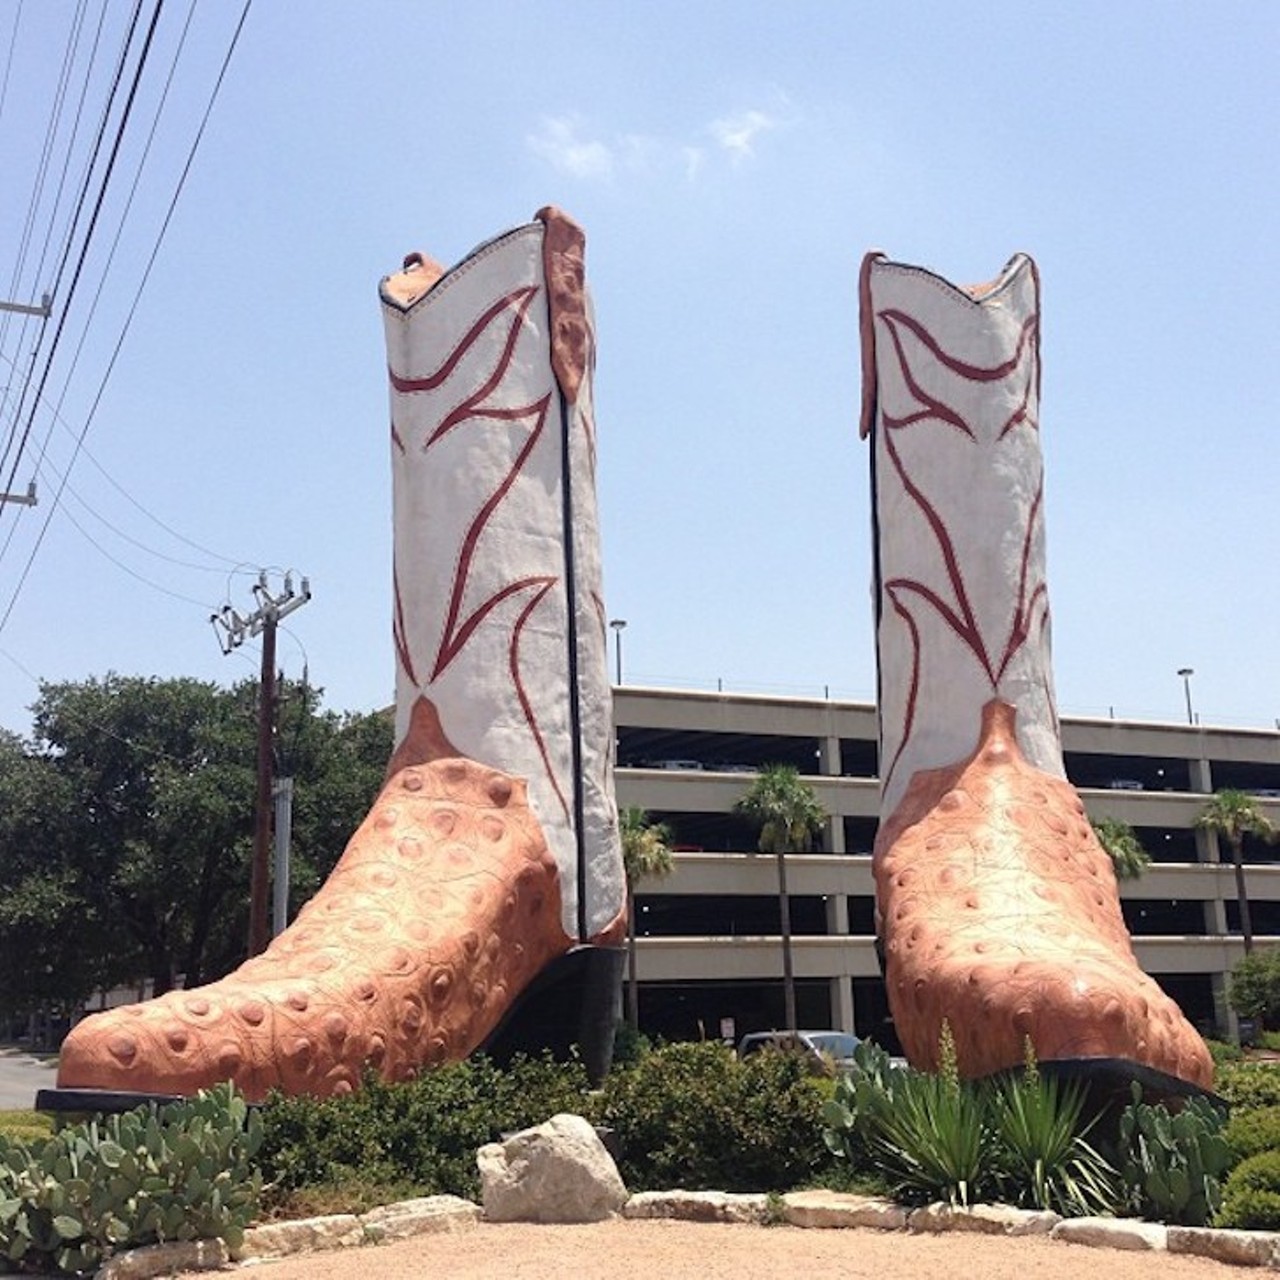 The World's Biggest Cowboy Boots 
7400 San Pedro Ave.
Sitting right outside the bustlin' North Star Mall are the World's Biggest Cowboy Boots, a familiar oddity for San Anto shoppers. 
Photo via Instagram (marksantaines)